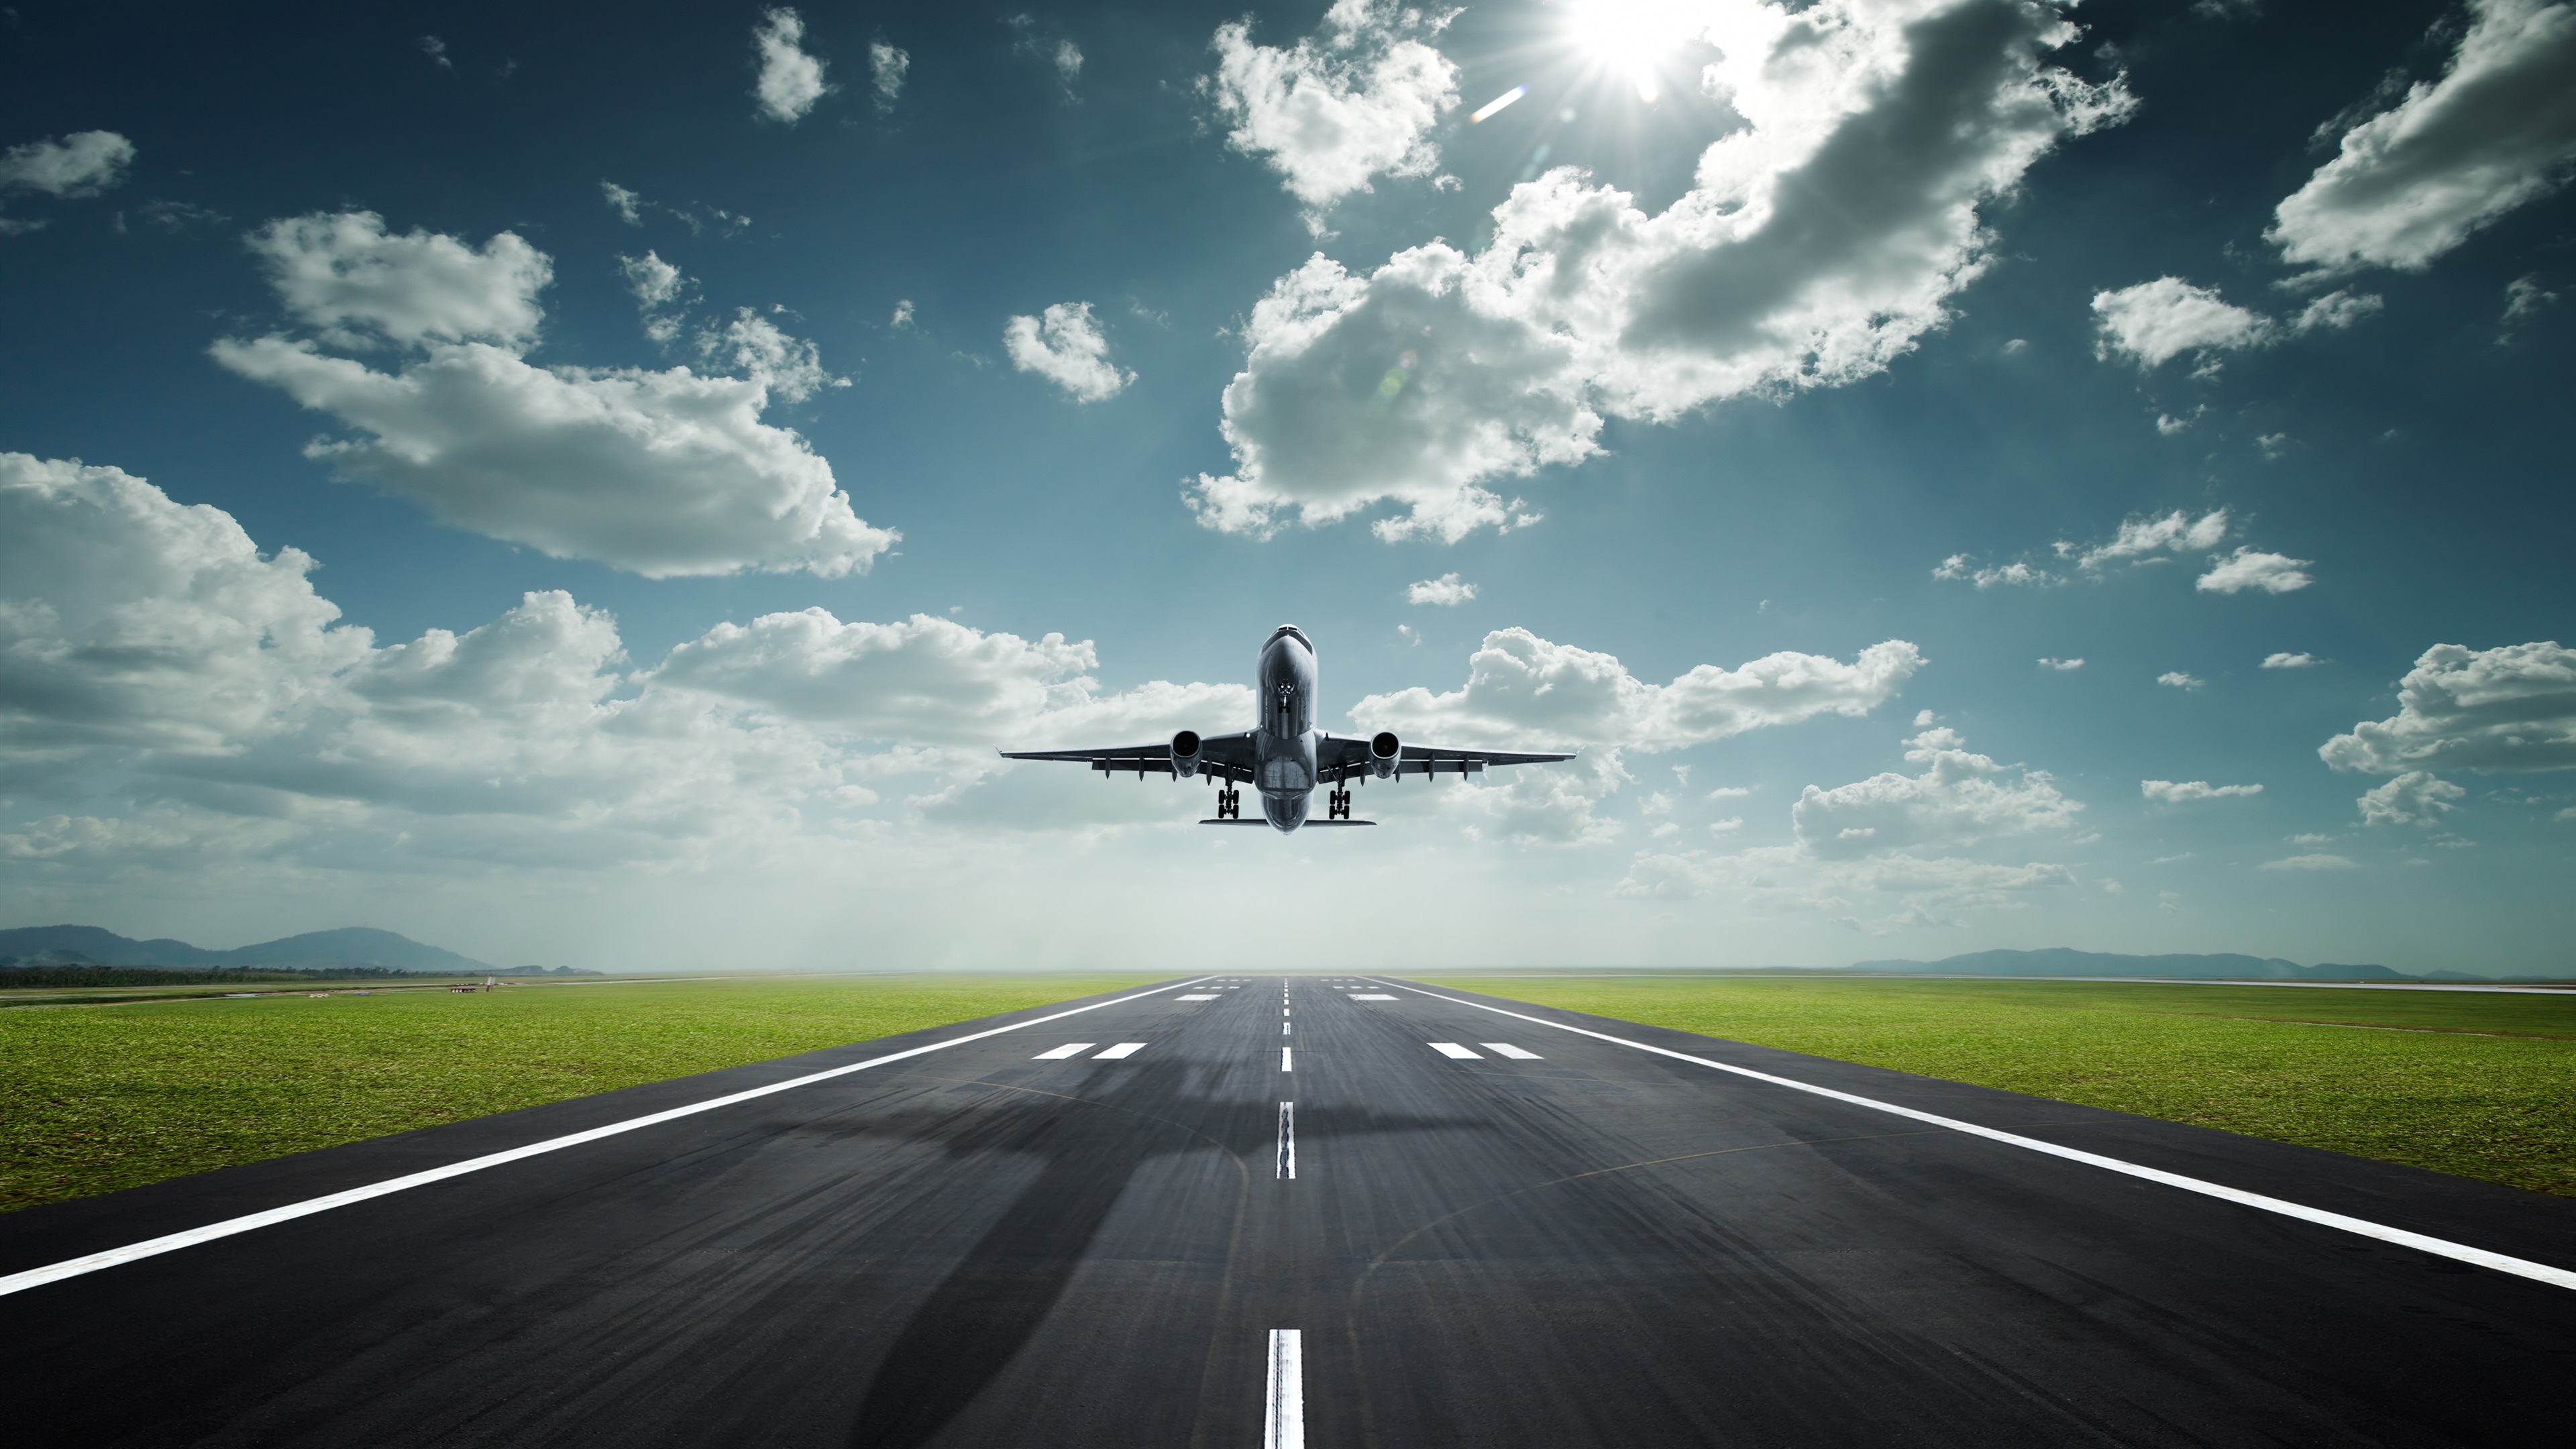 Wallpaper Passenger plane take off, airport, road, clouds, sun 3840x2160 UHD 4K Picture, Image